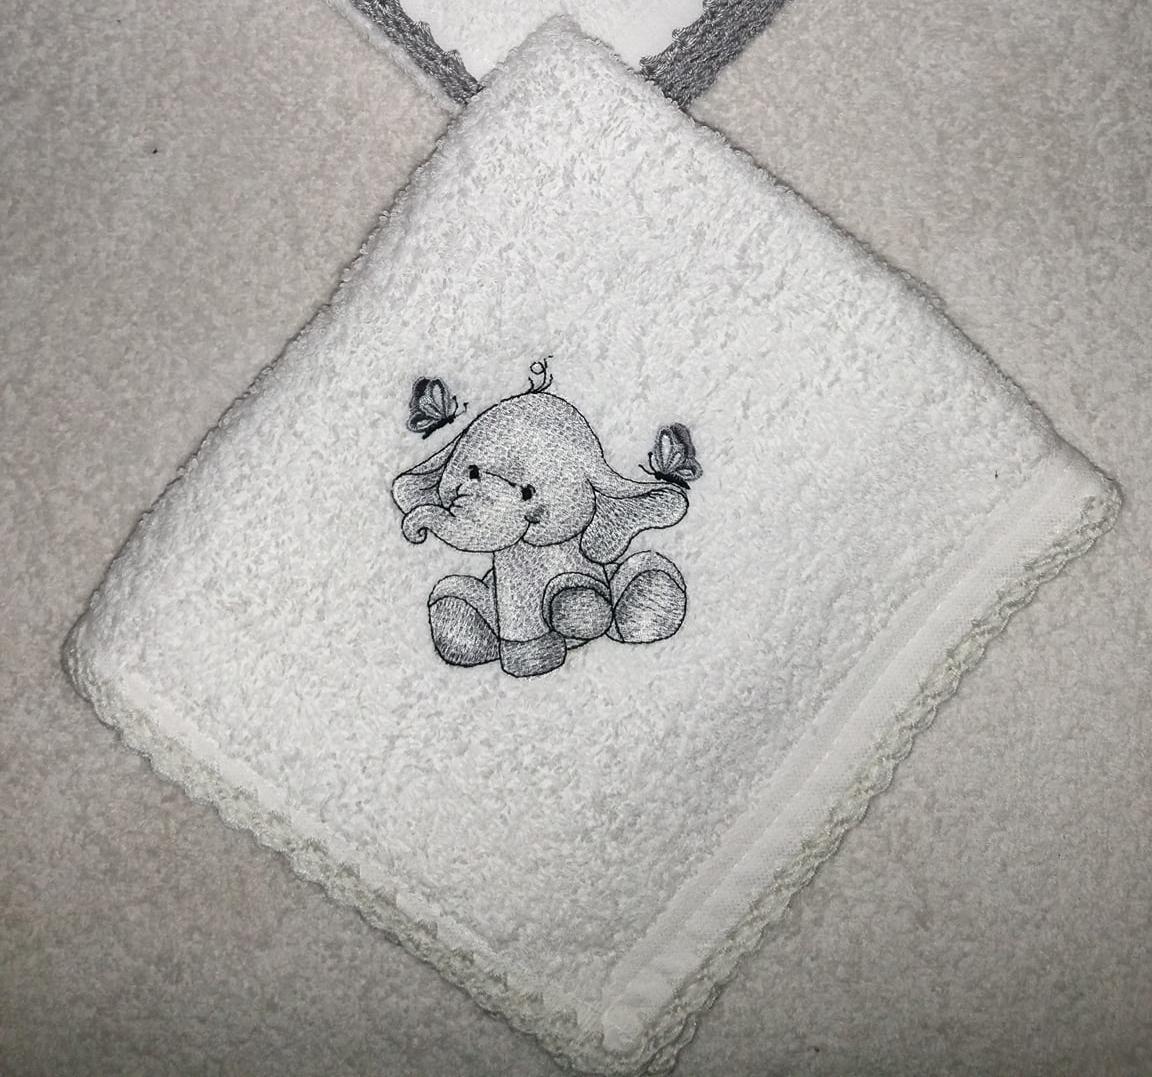 Embroidered napkin with Baby elephant design